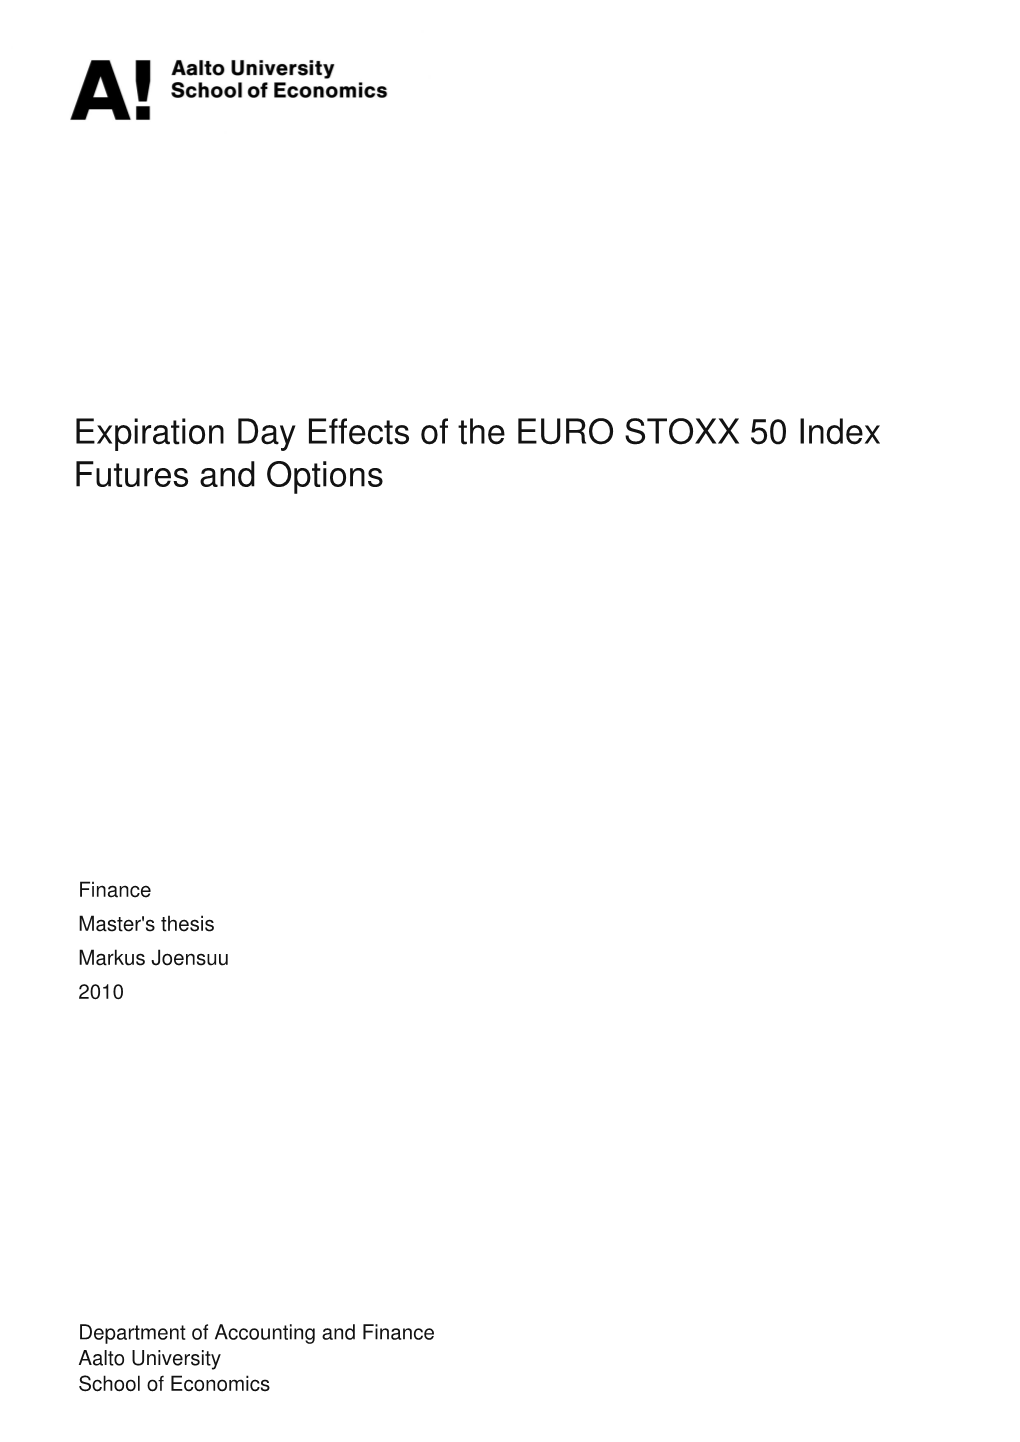 Expiration Day Effects of the EURO STOXX 50 Index Futures and Options